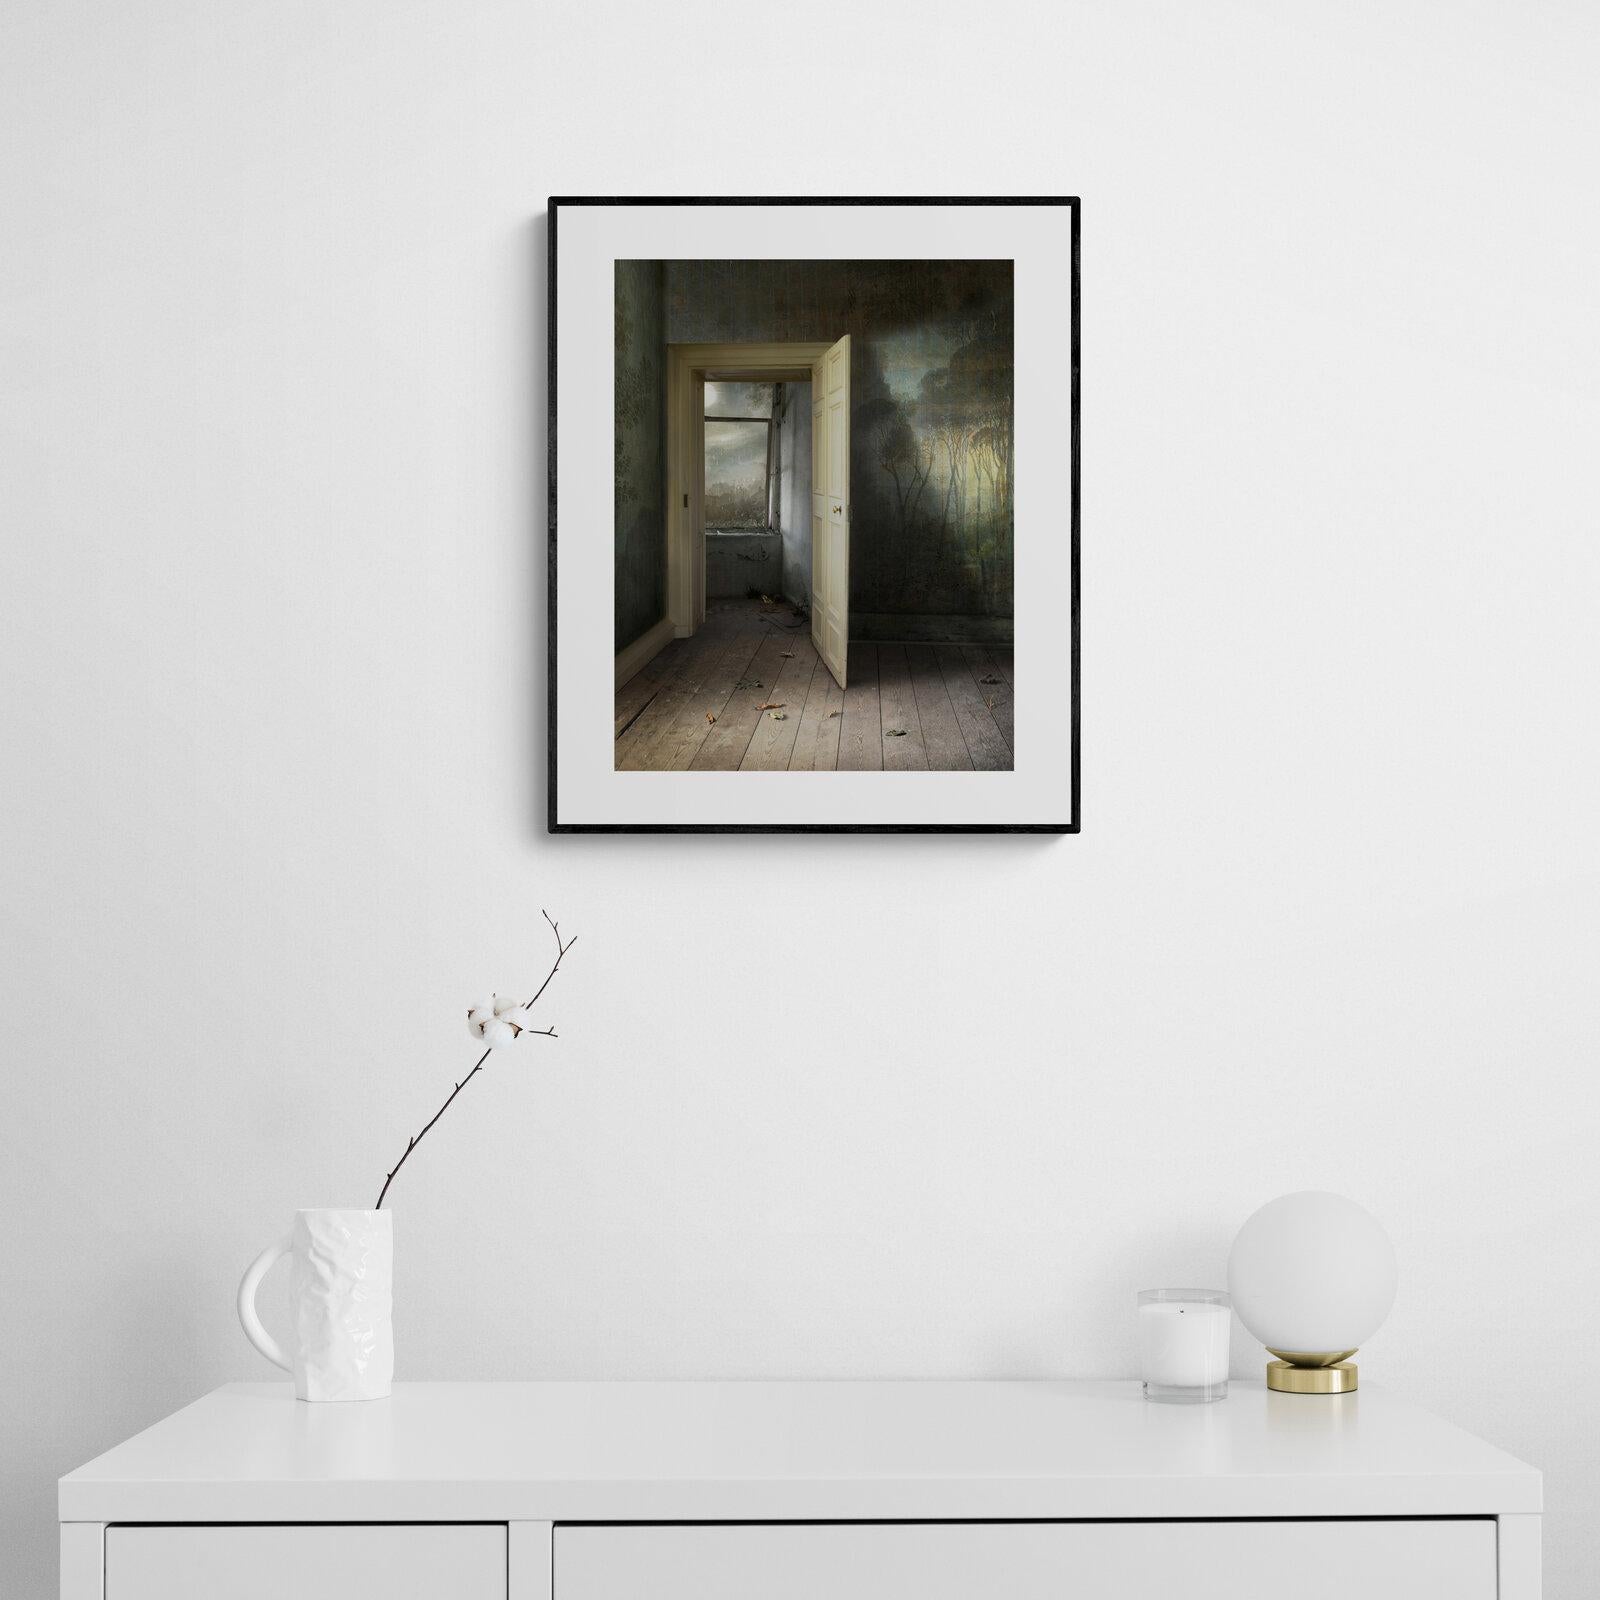 Interior With Open Door - Photomontage, Archival Pigment Print, Interiors - Photograph by Suzanne Moxhay